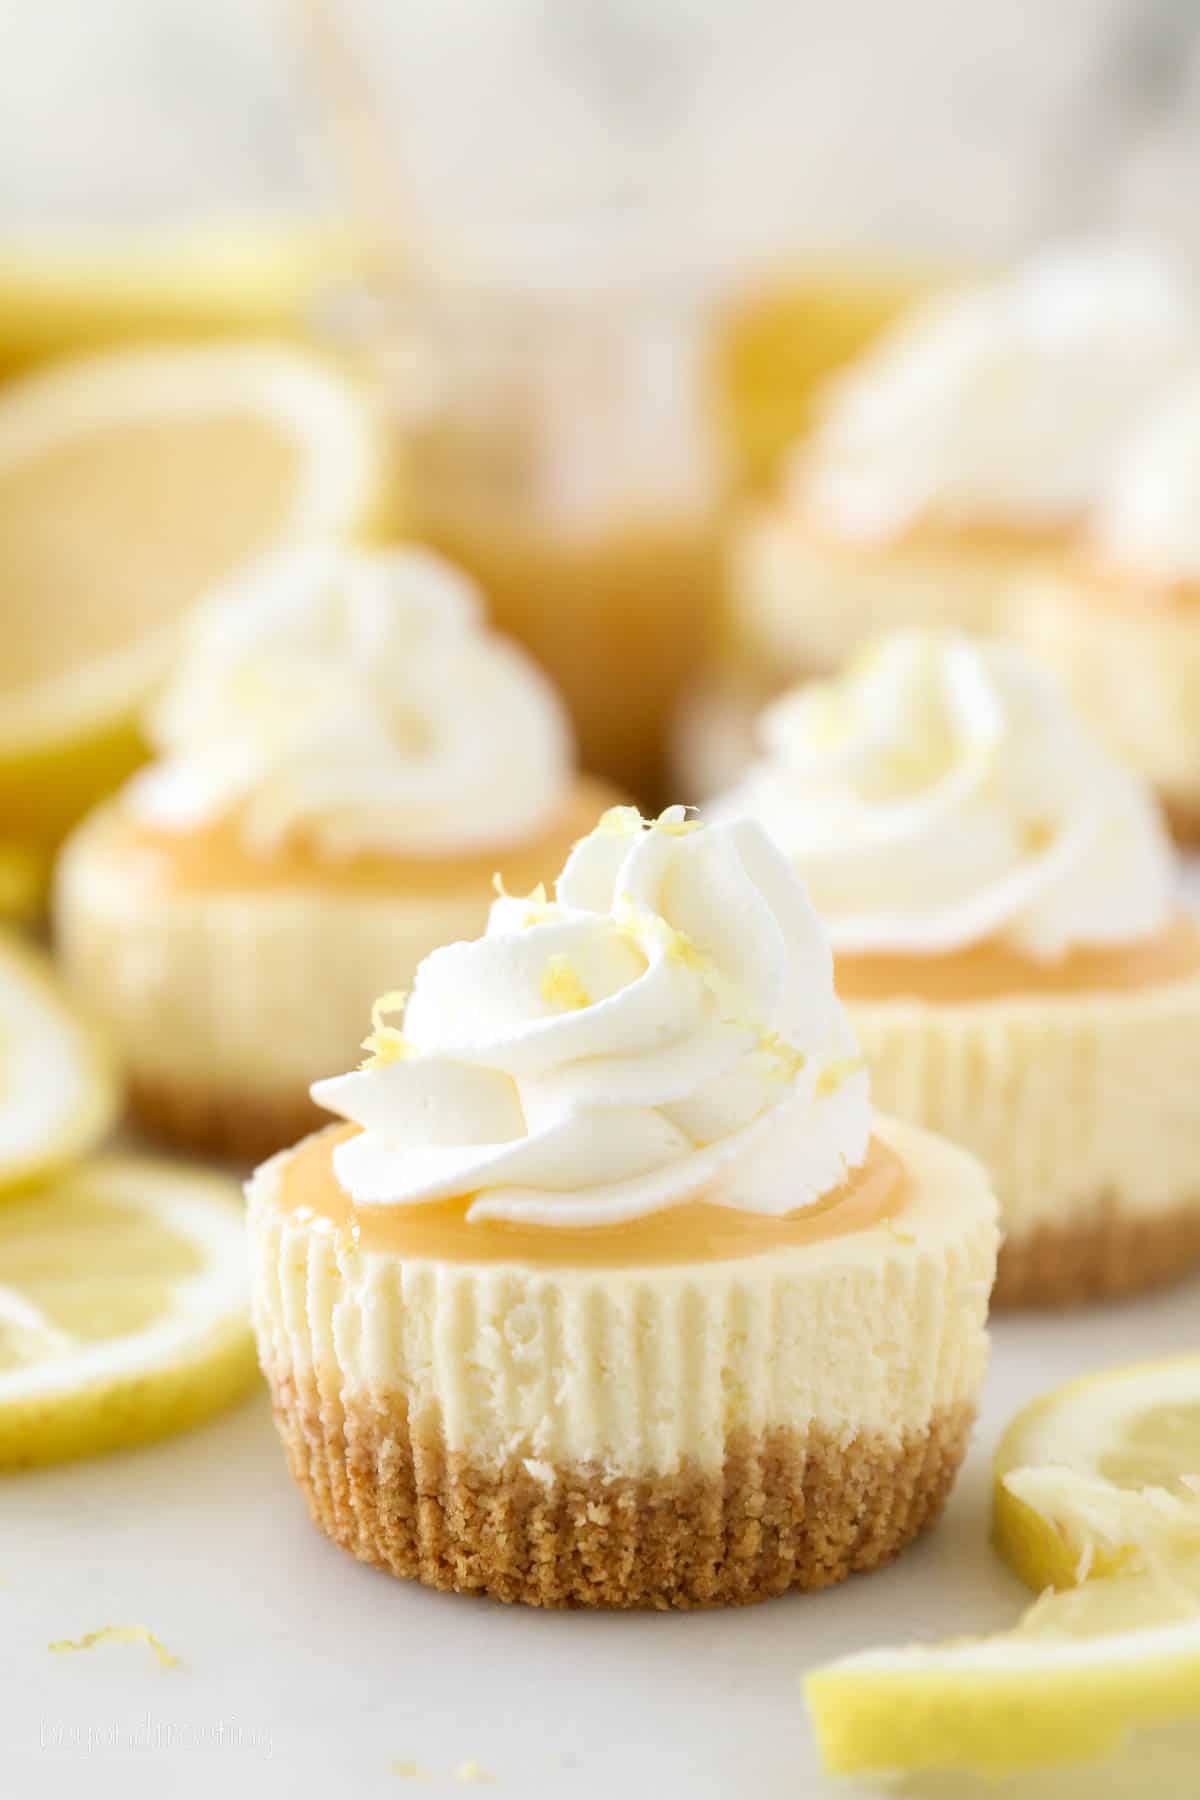 A mini lemon cheesecake topped with lemon curd and a swirl of whipped cream, with more mini cheesecakes in the background.